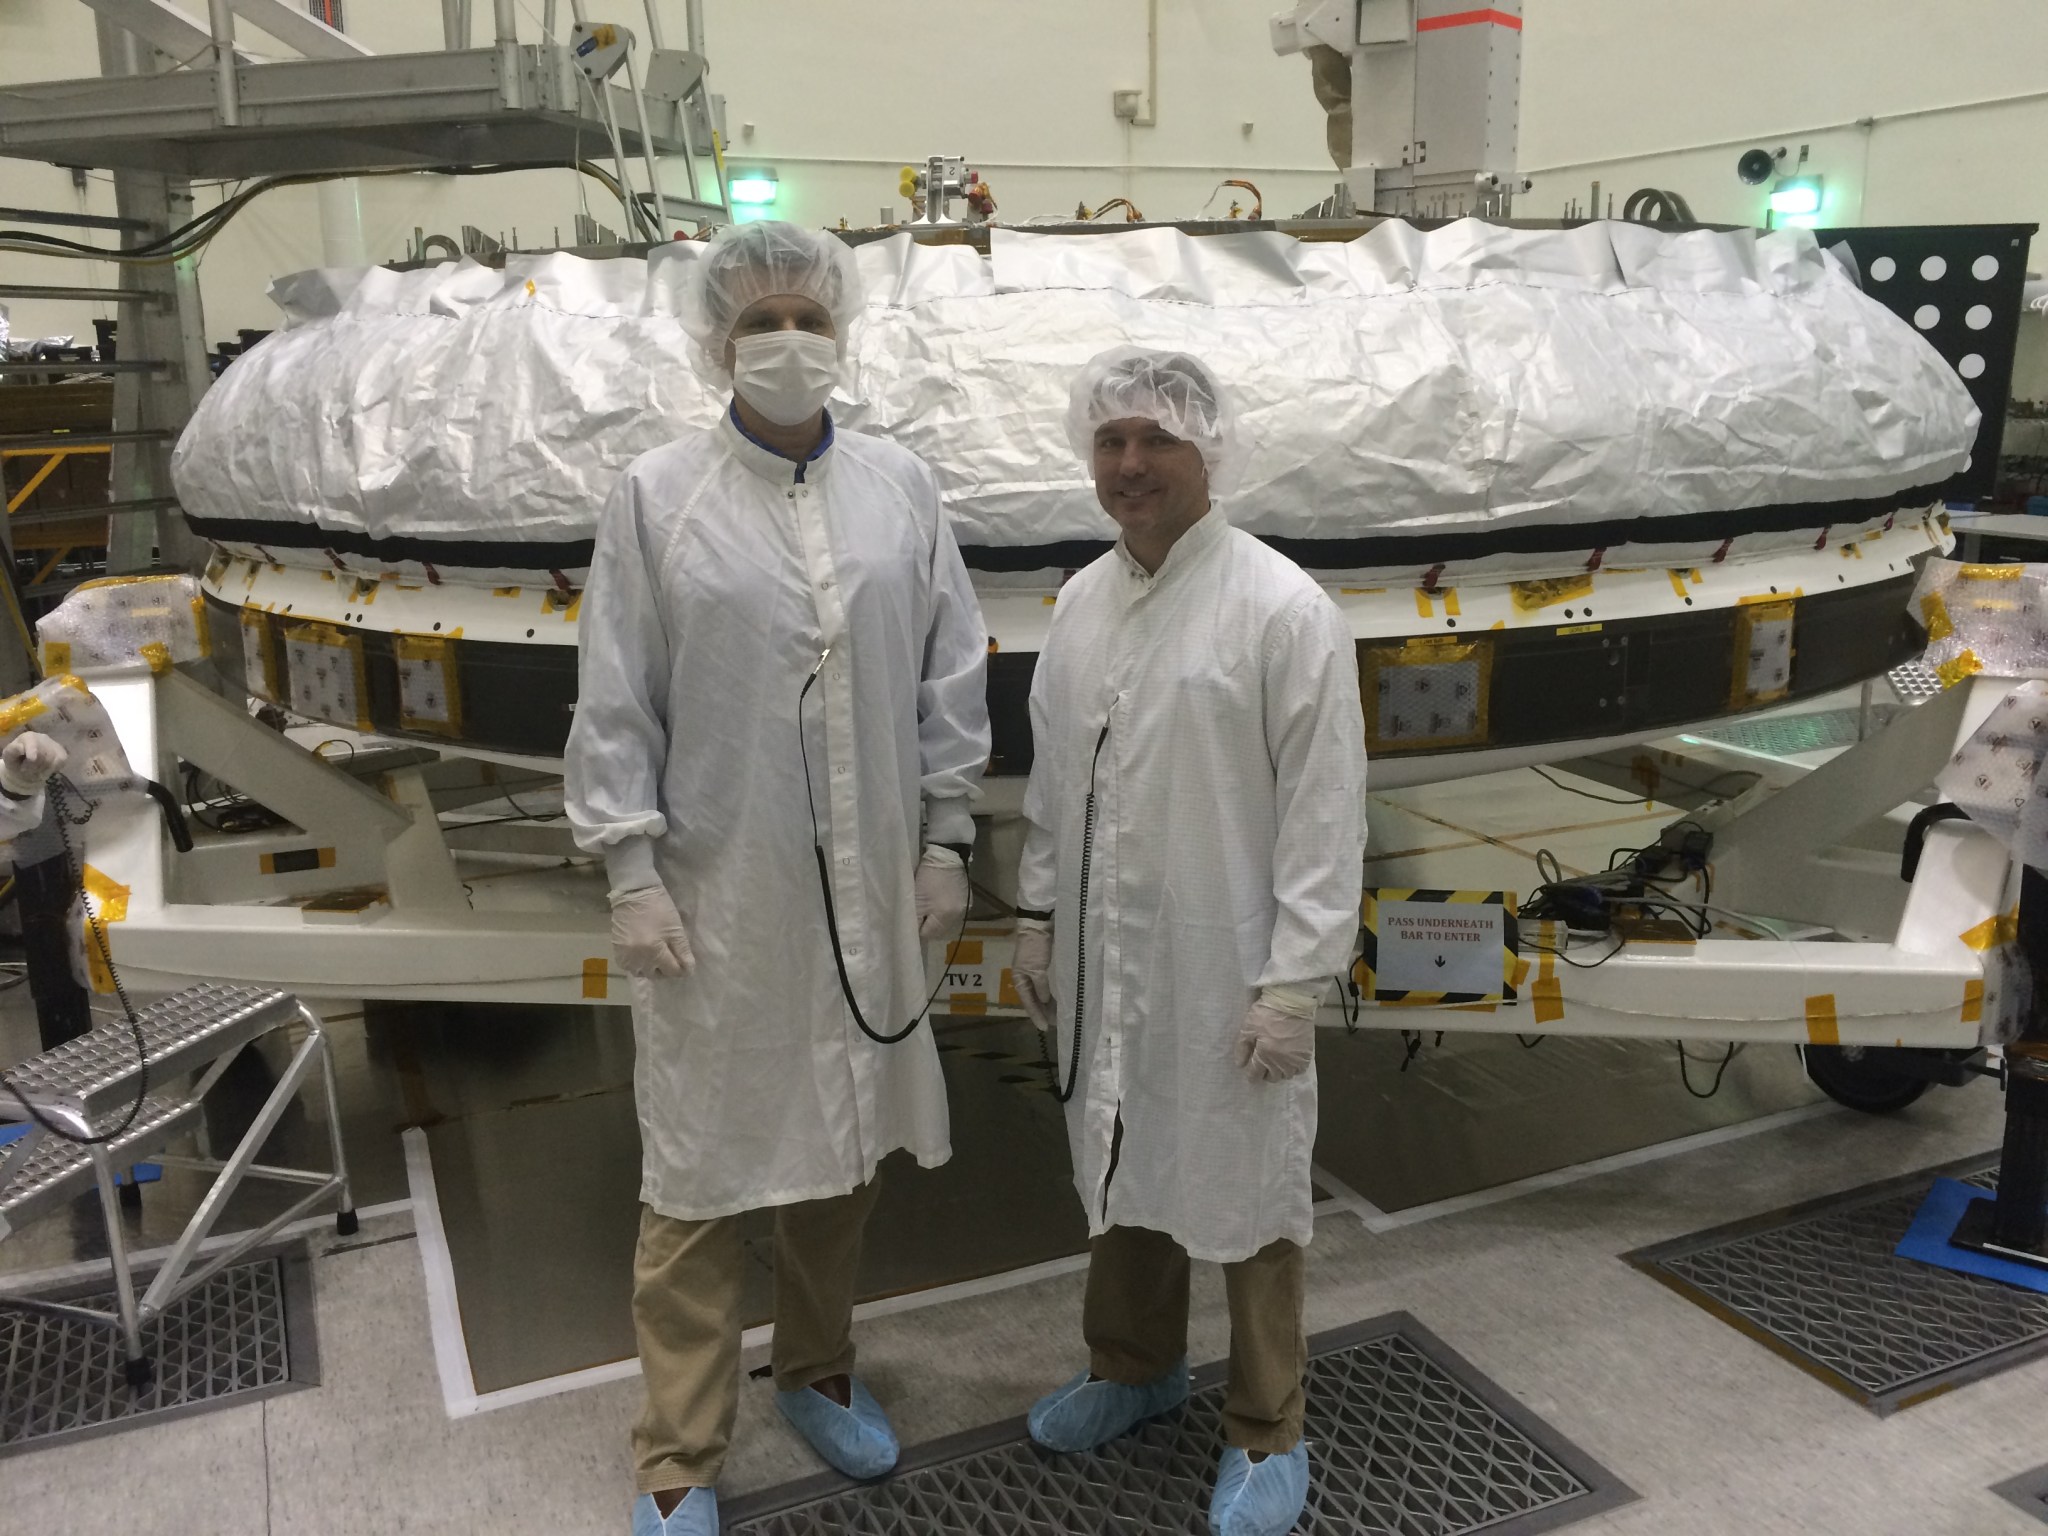 This photo was taken during a visit to JPL for LDSD. The “spare” Rover is in the background.